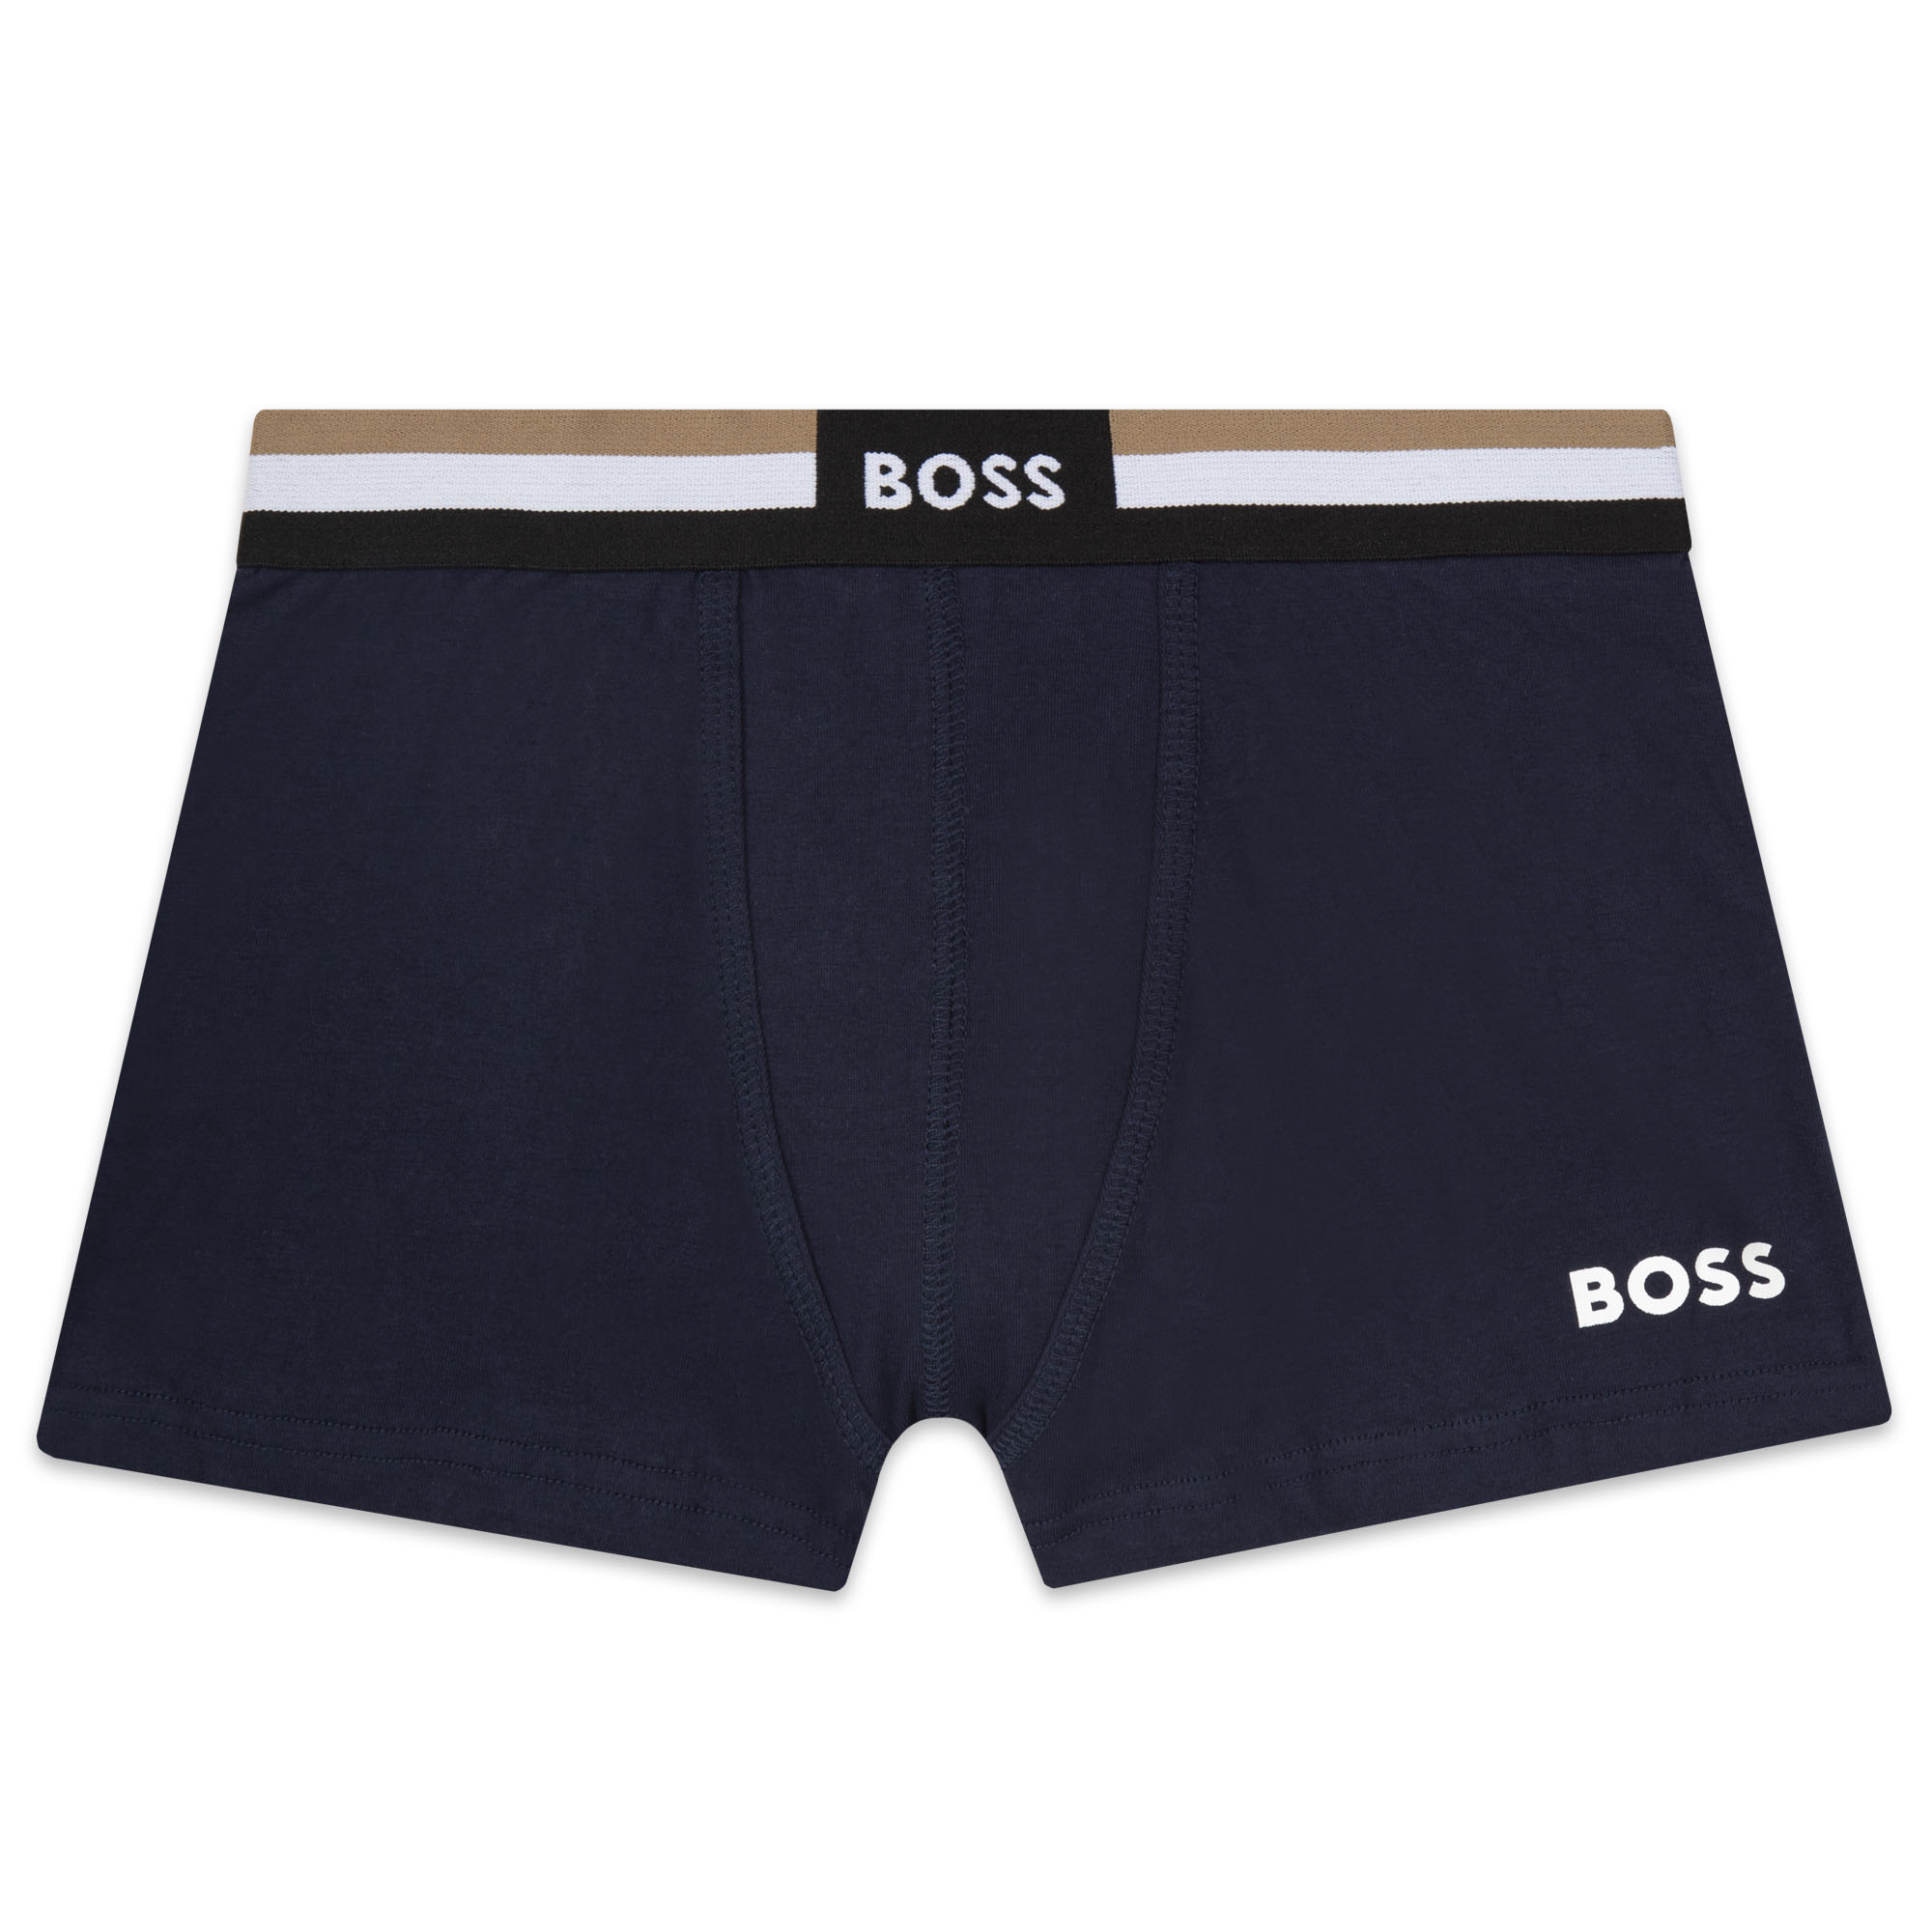 Two-pack of boxers in a box BOSS for BOY